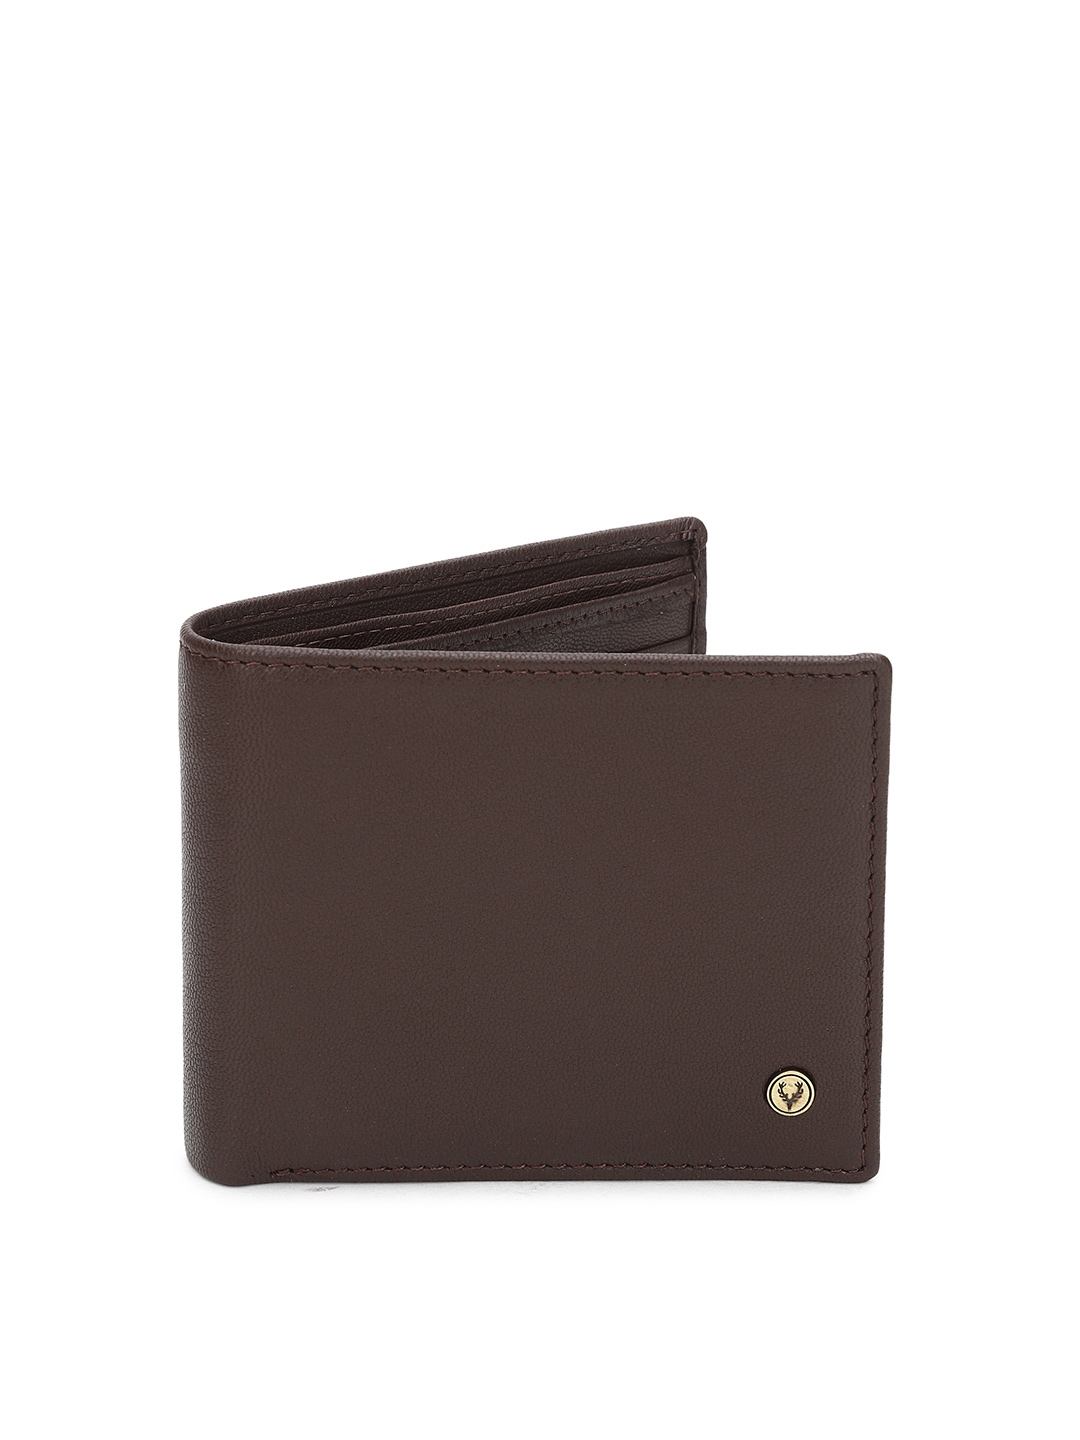 Buy Allen Solly Men Coffee Brown Solid Two Fold Leather Wallet ...